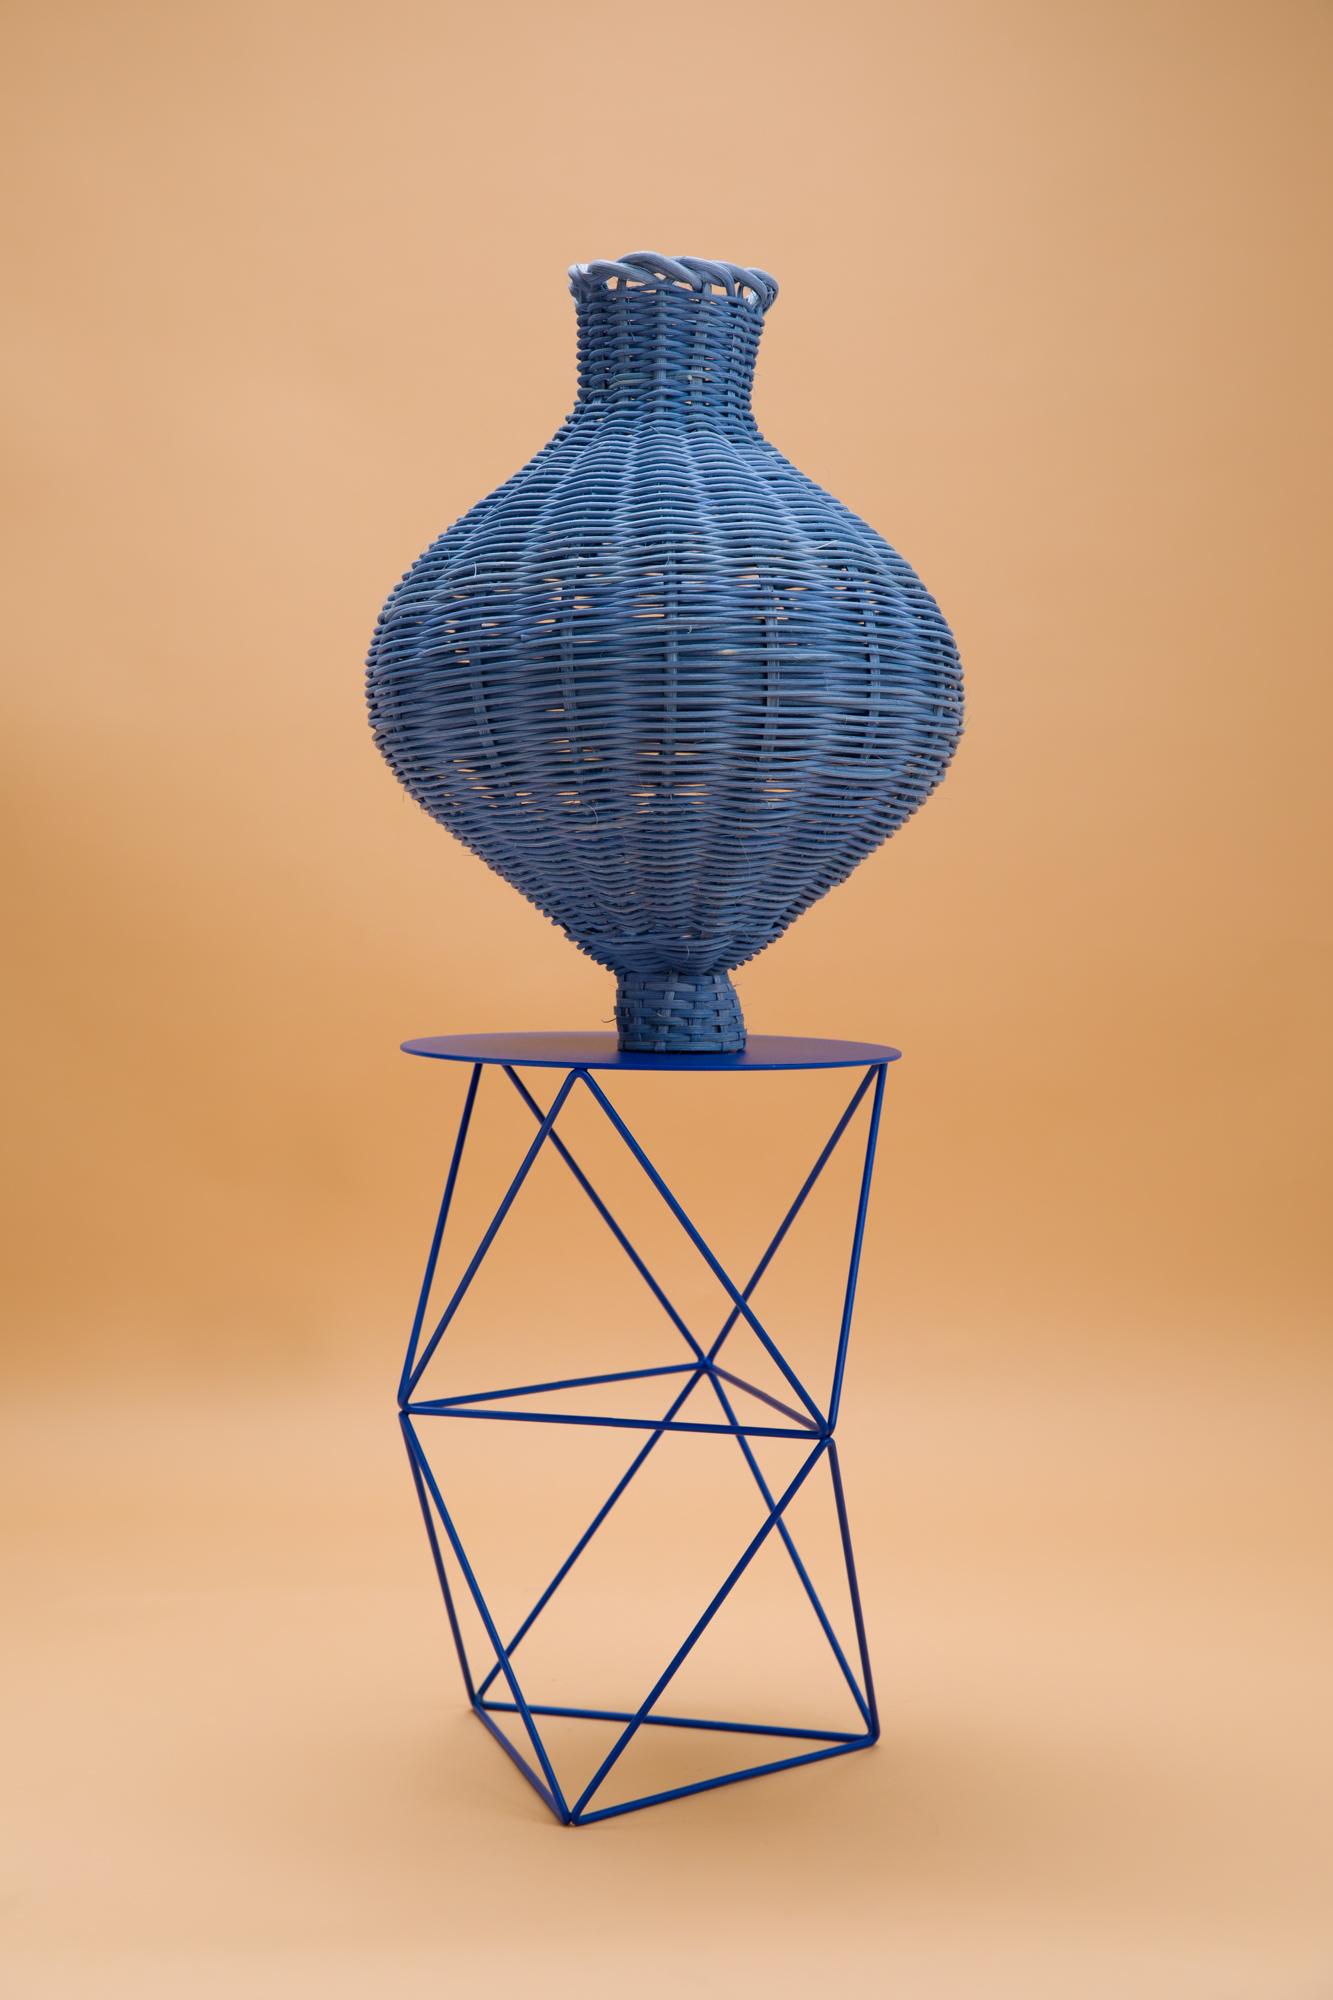 The Amphora Vase is hand dyed and woven with reed in our Chicago studio. Inspired by forms in ancient Greek ceramics, the material language of this vessel brings together the rich craft history of weaving with 3 dimensional form.

All of Studio